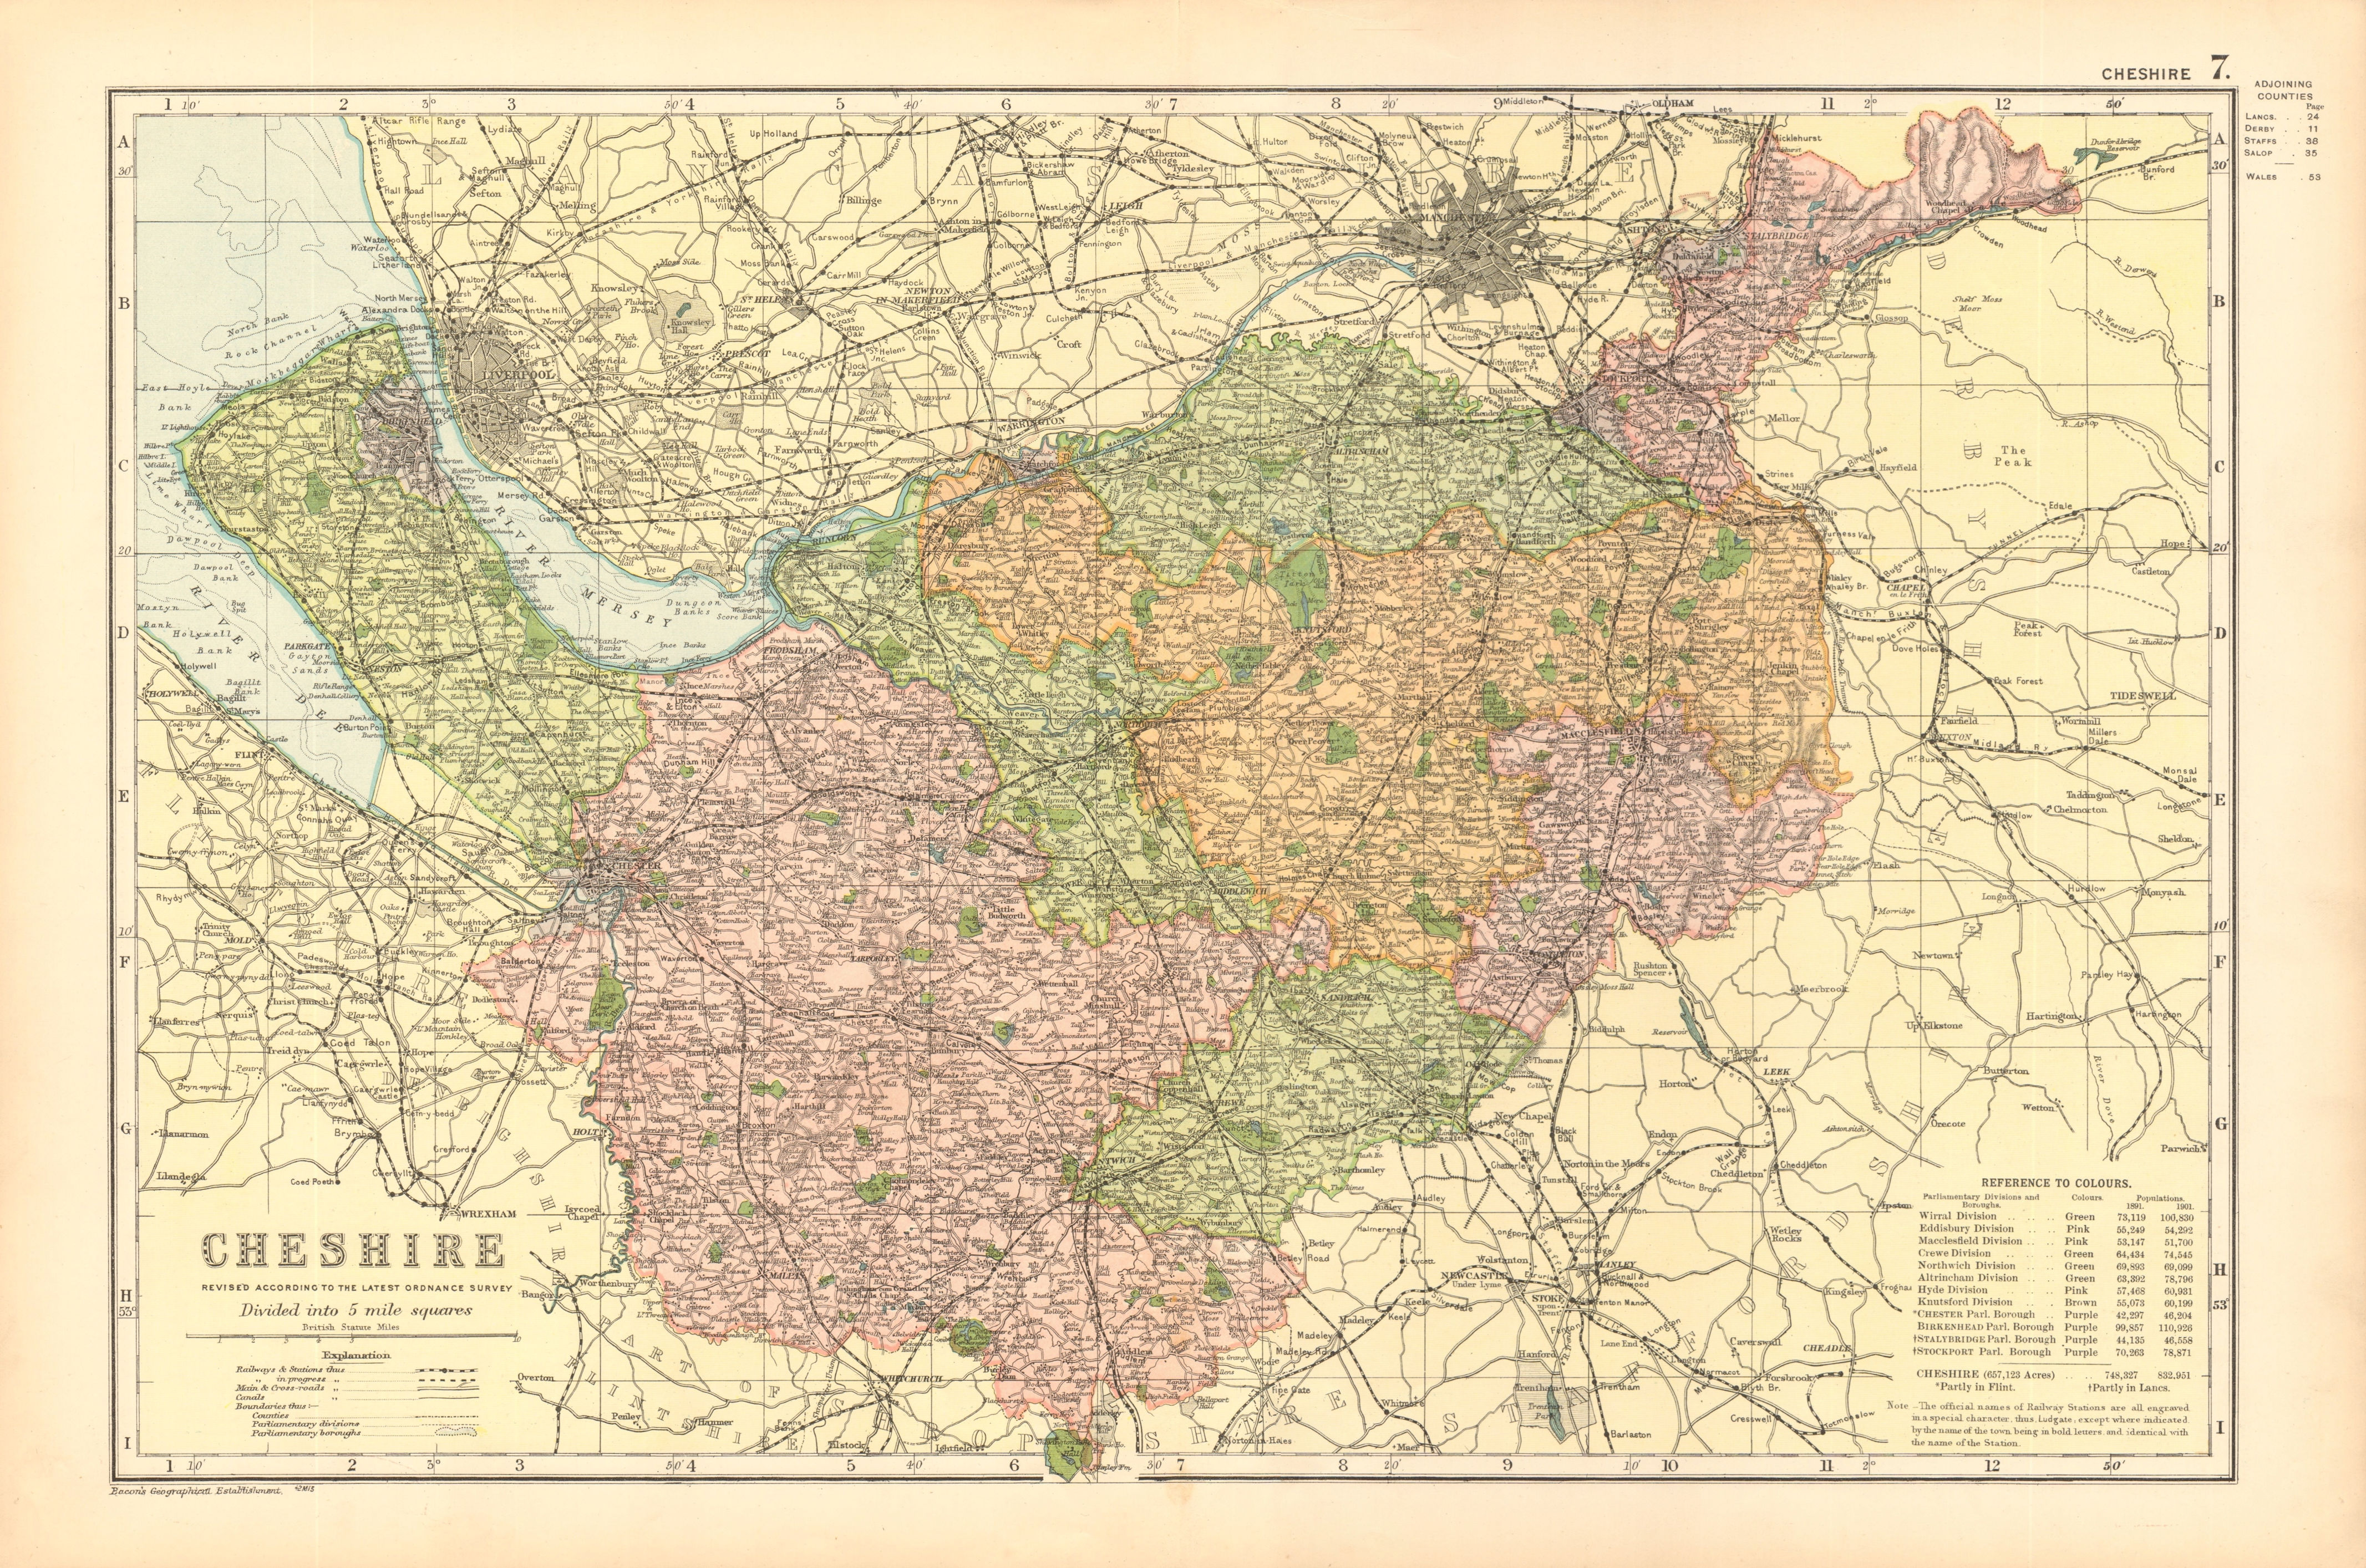 CHESHIRE. Showing Parliamentary divisions, boroughs & parks. BACON 1904 map